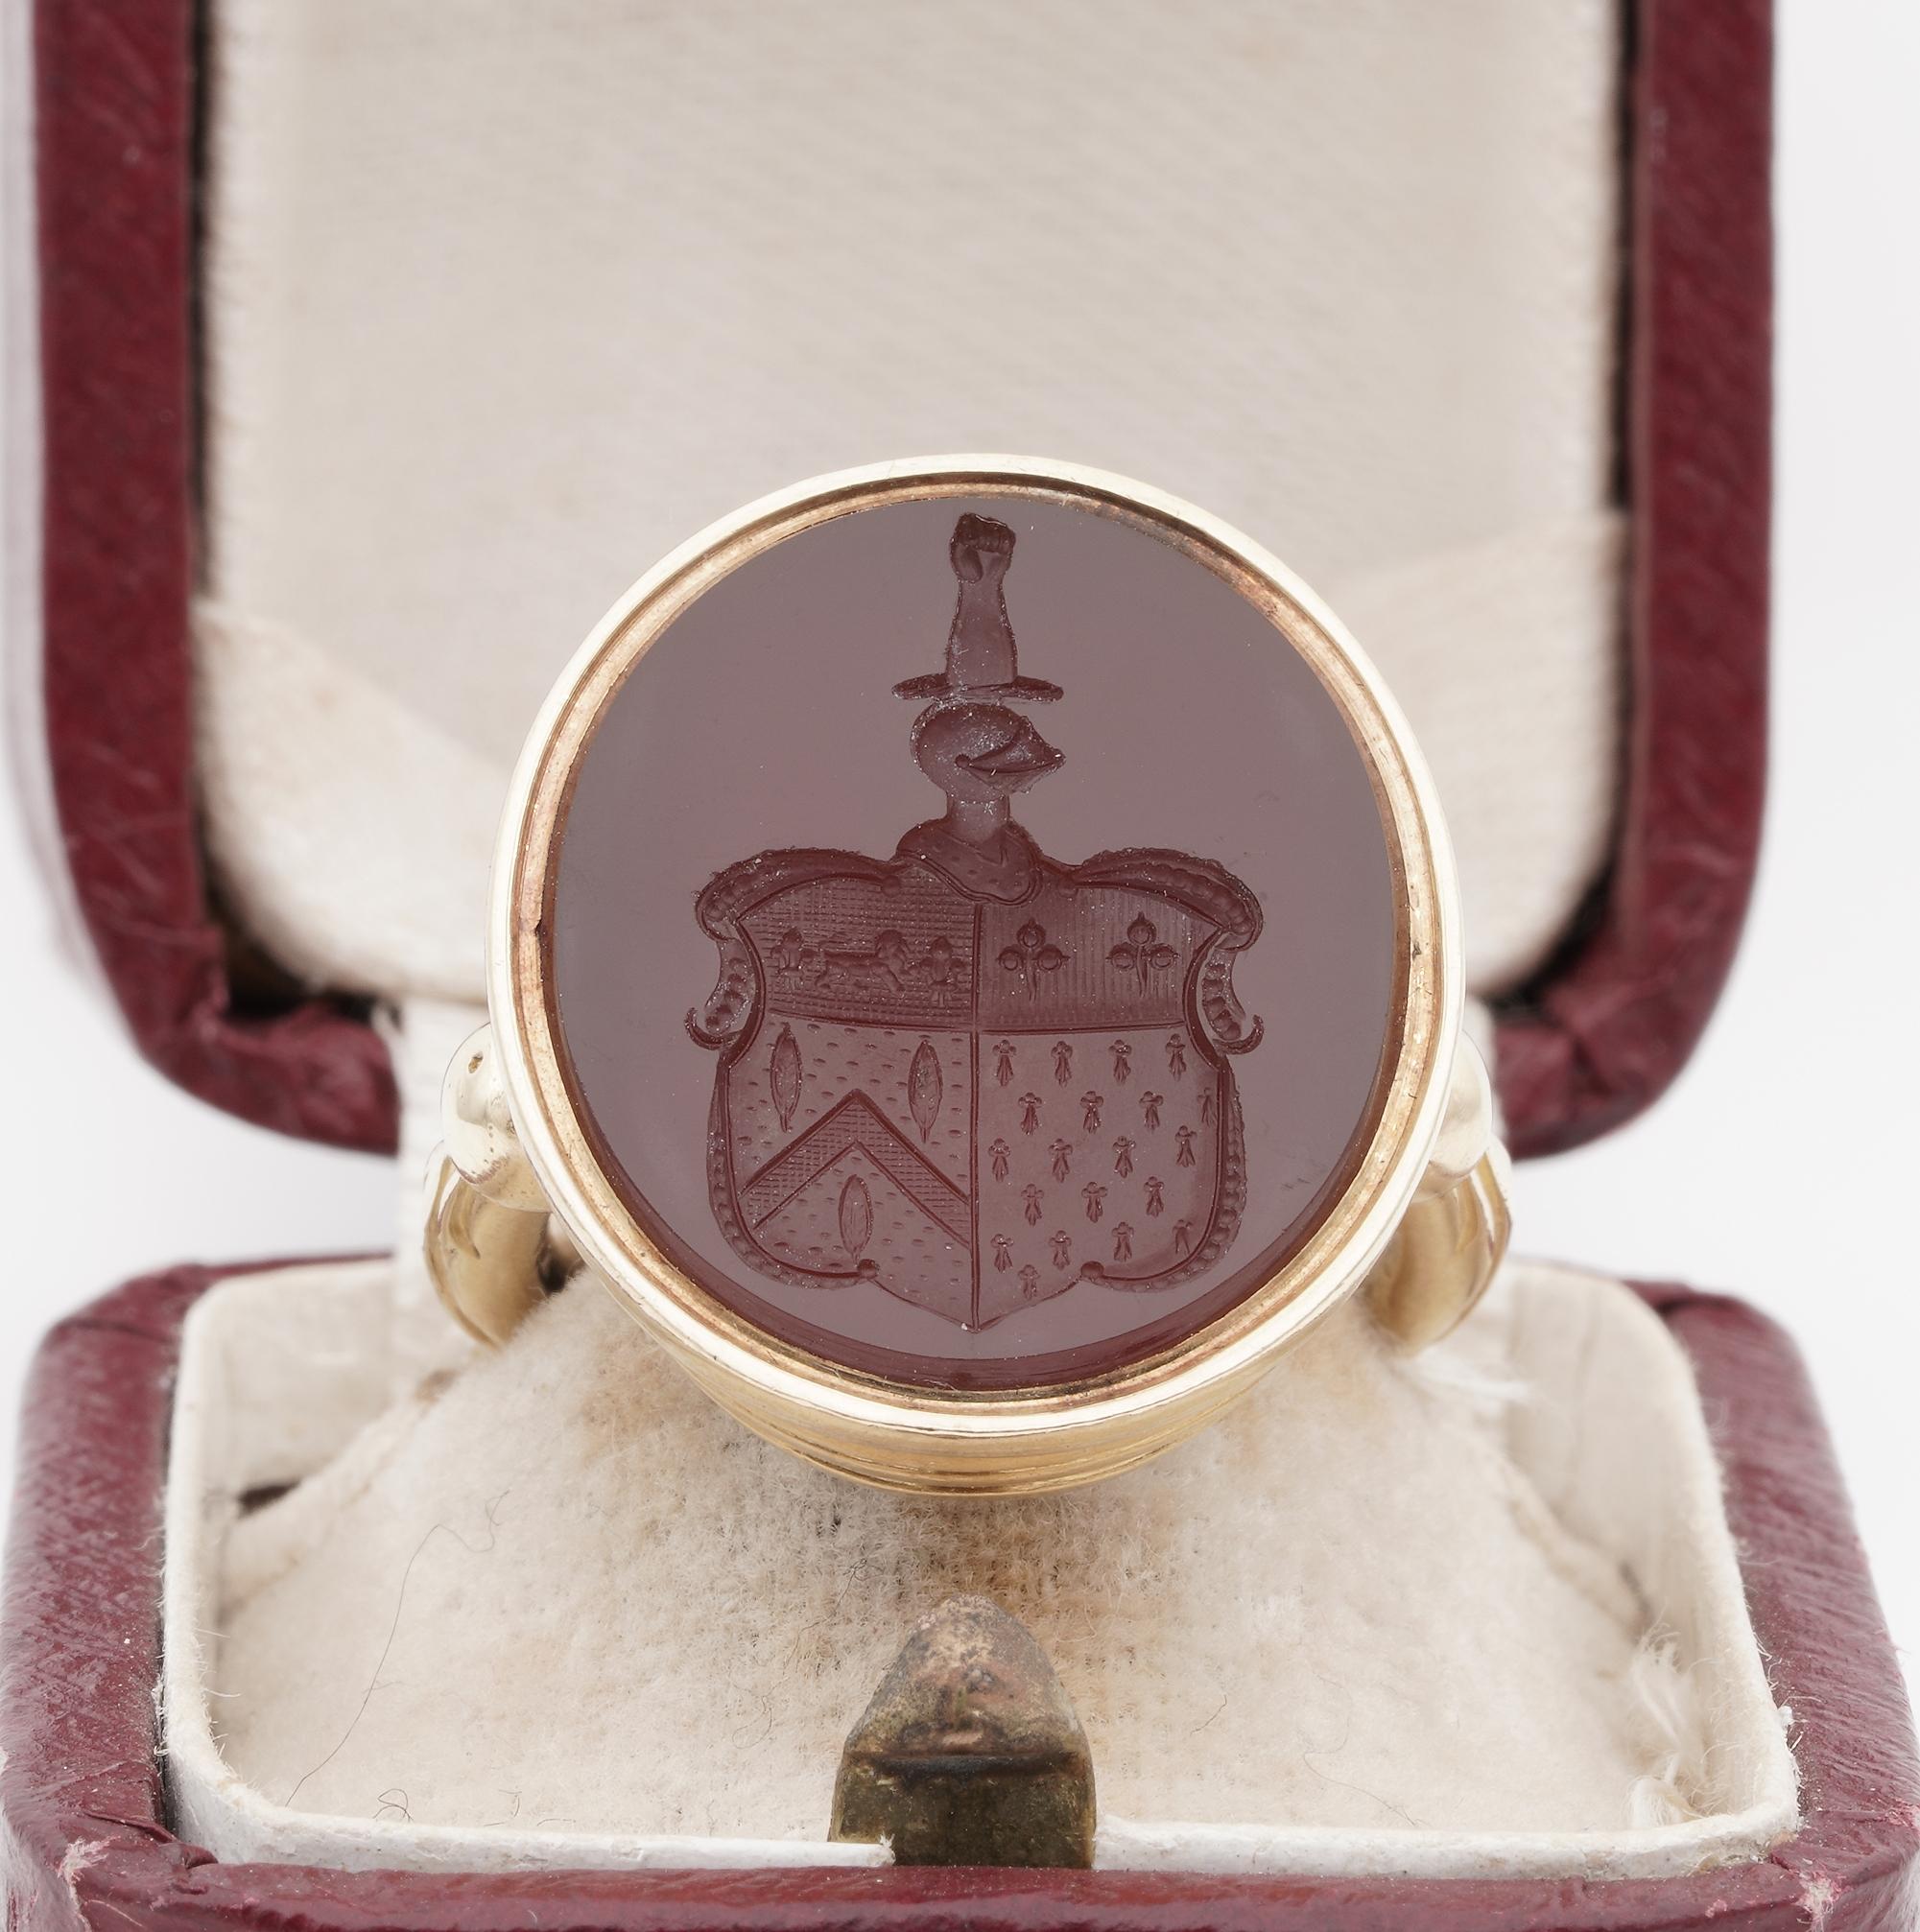 Stepping back into History
An impressive antique Carnelian intaglio seal ring, bearing full British hallmarks for 1868 age and 18 ct gold
The face set with a large oval piece of Carnelian, reverse engraved to depict coat of arms, exquisitely made